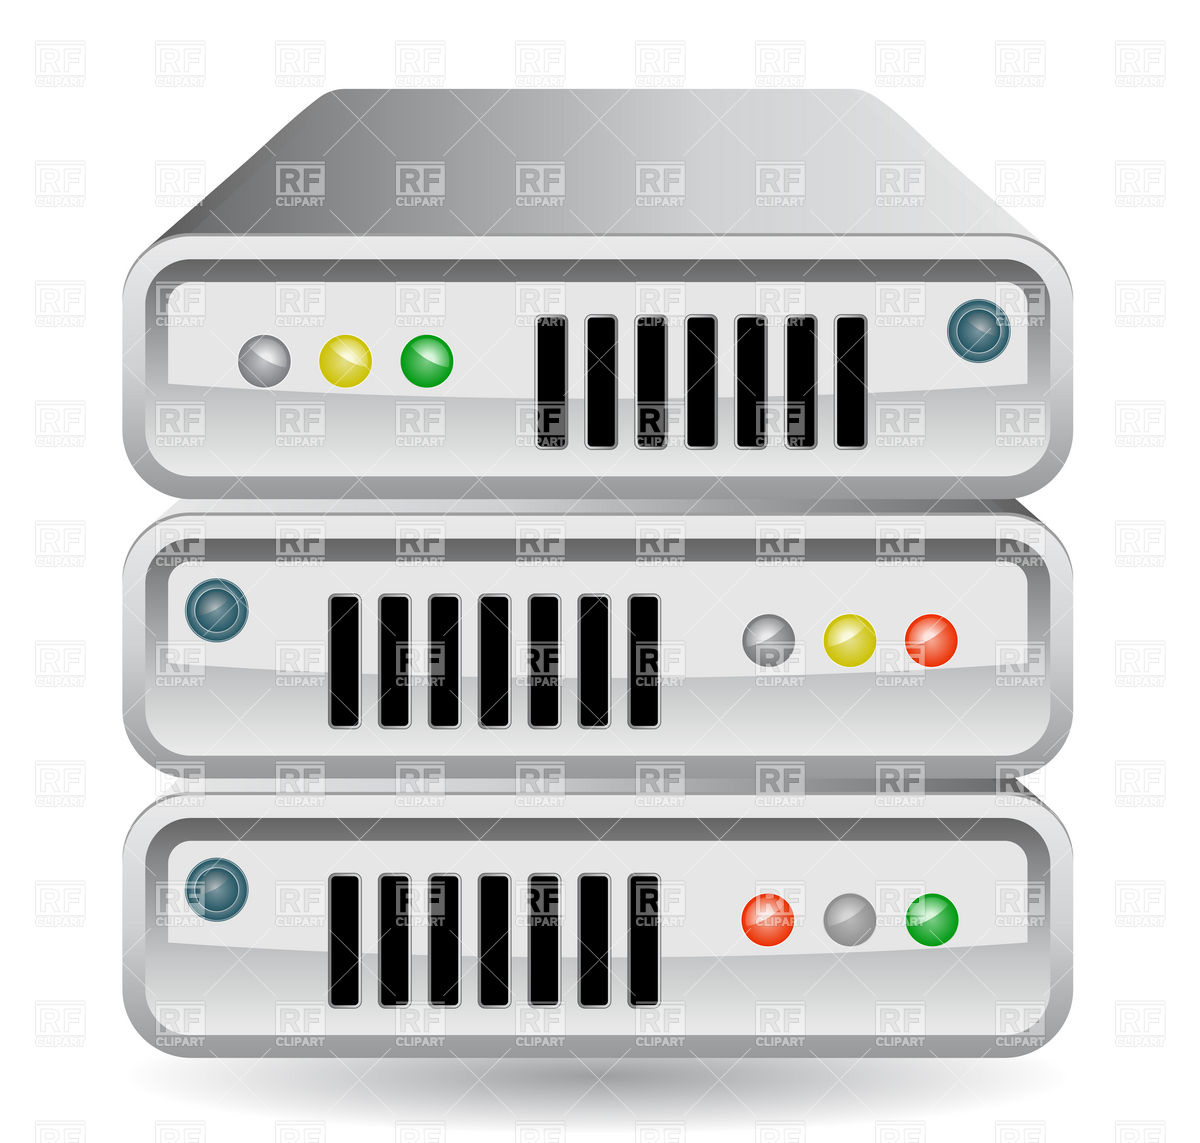 Network Equipment Icon Network Router Switch Server 5909